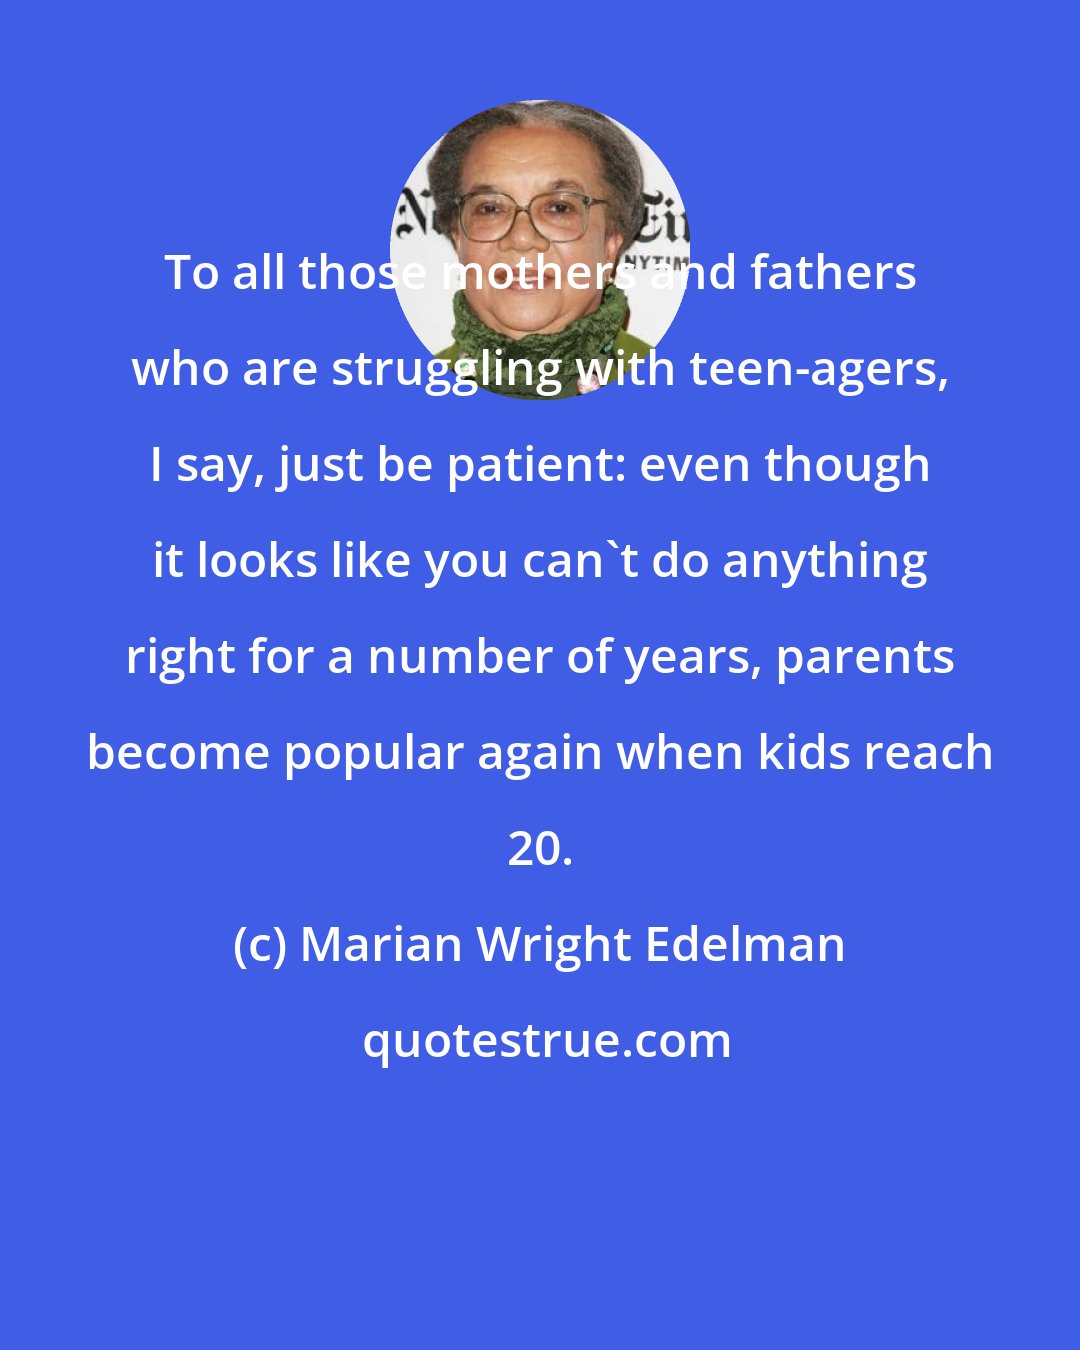 Marian Wright Edelman: To all those mothers and fathers who are struggling with teen-agers, I say, just be patient: even though it looks like you can't do anything right for a number of years, parents become popular again when kids reach 20.